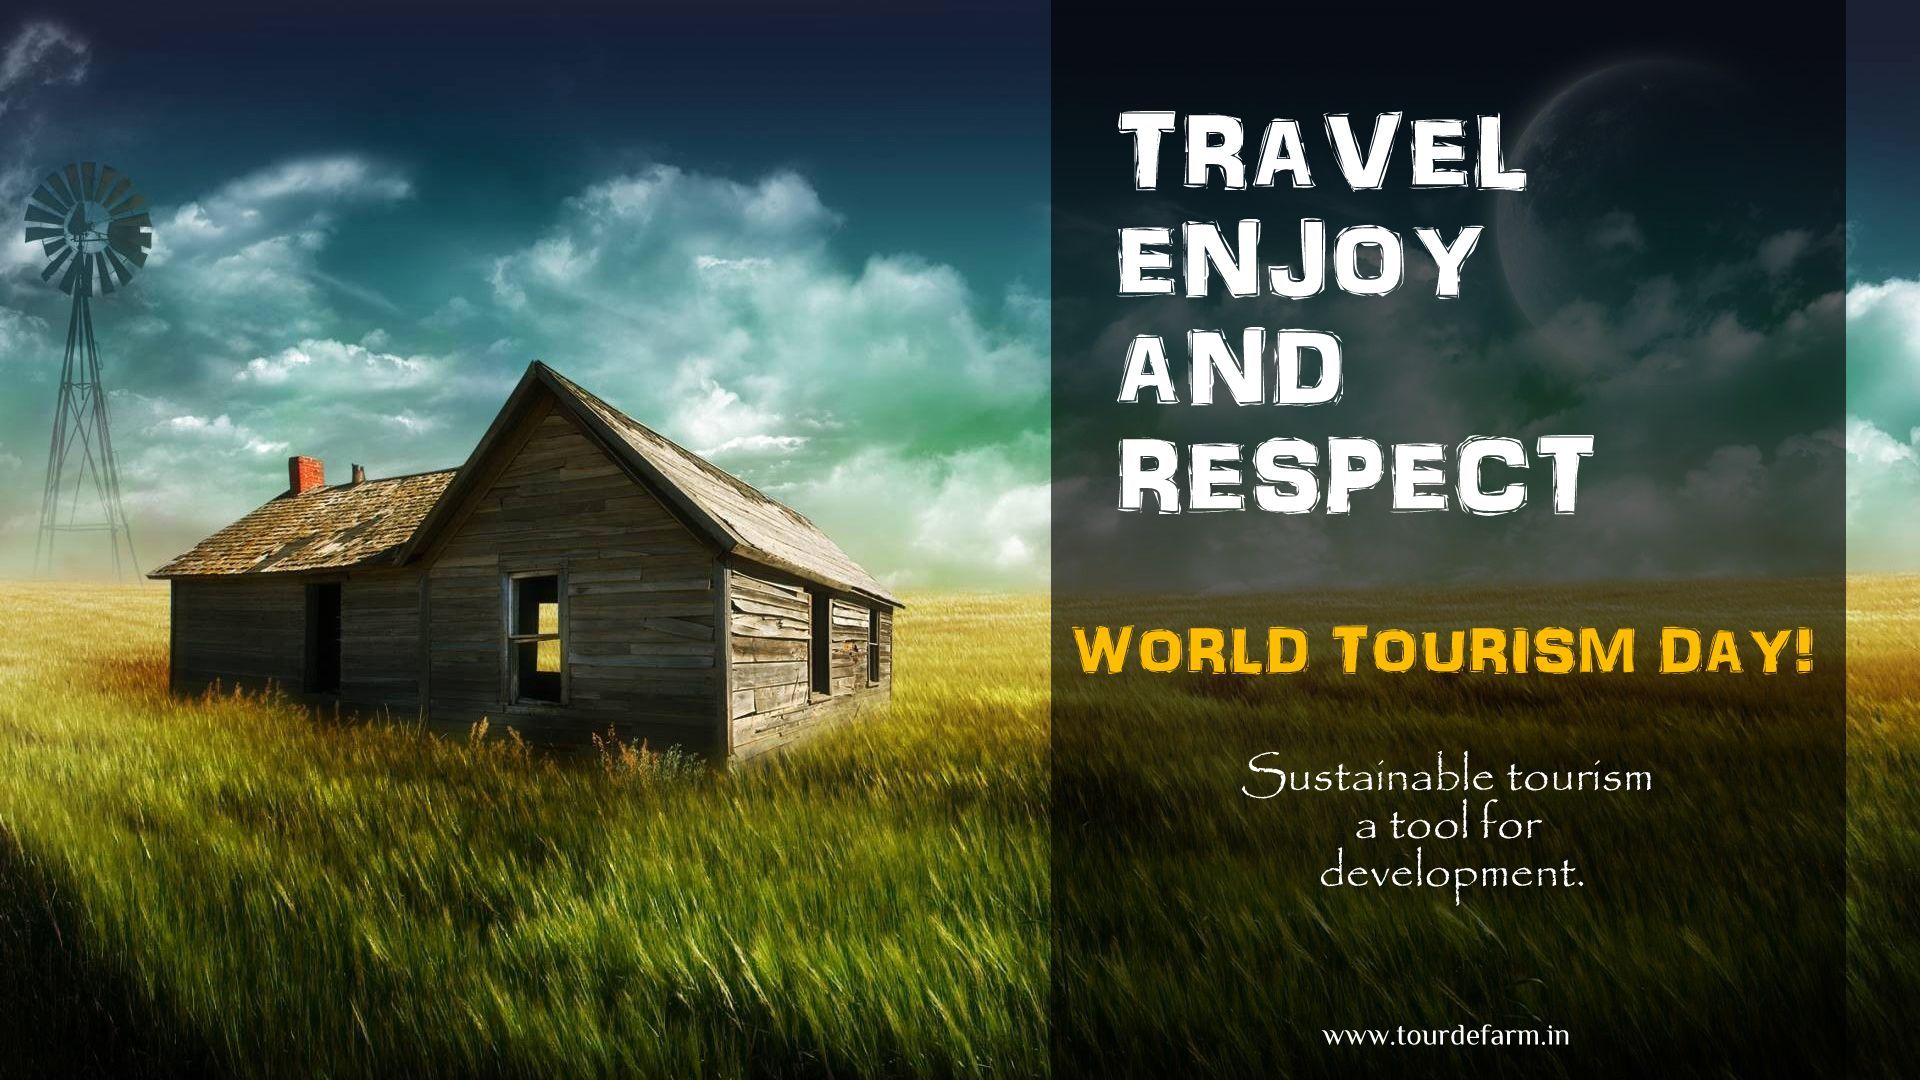 Happy World Tourism Day! This World Tourism Day, whenever you travel ...